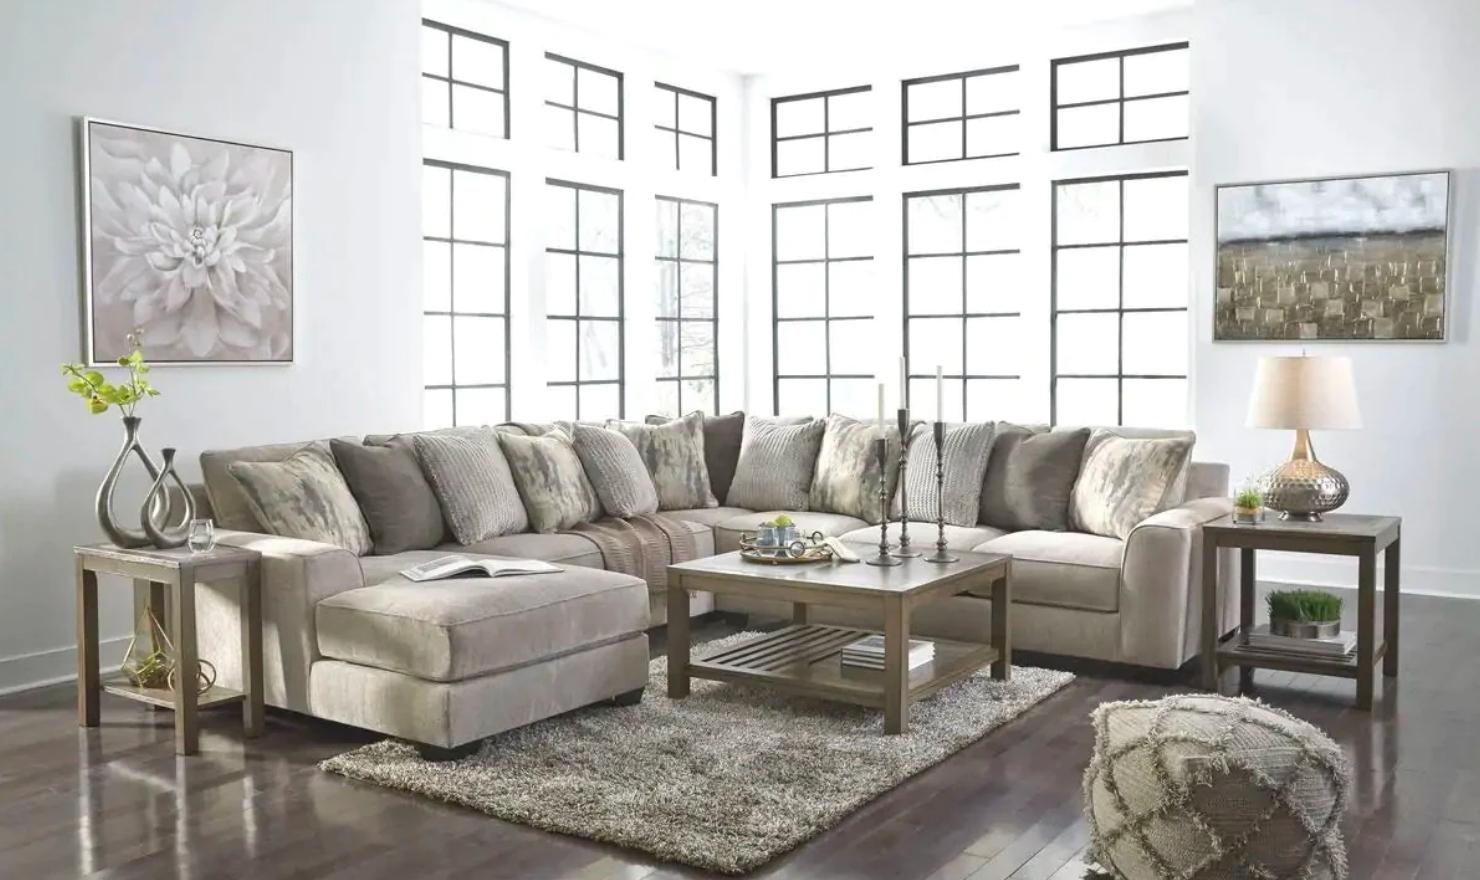 L-shaped vs. U-shaped sectional - Which is the best